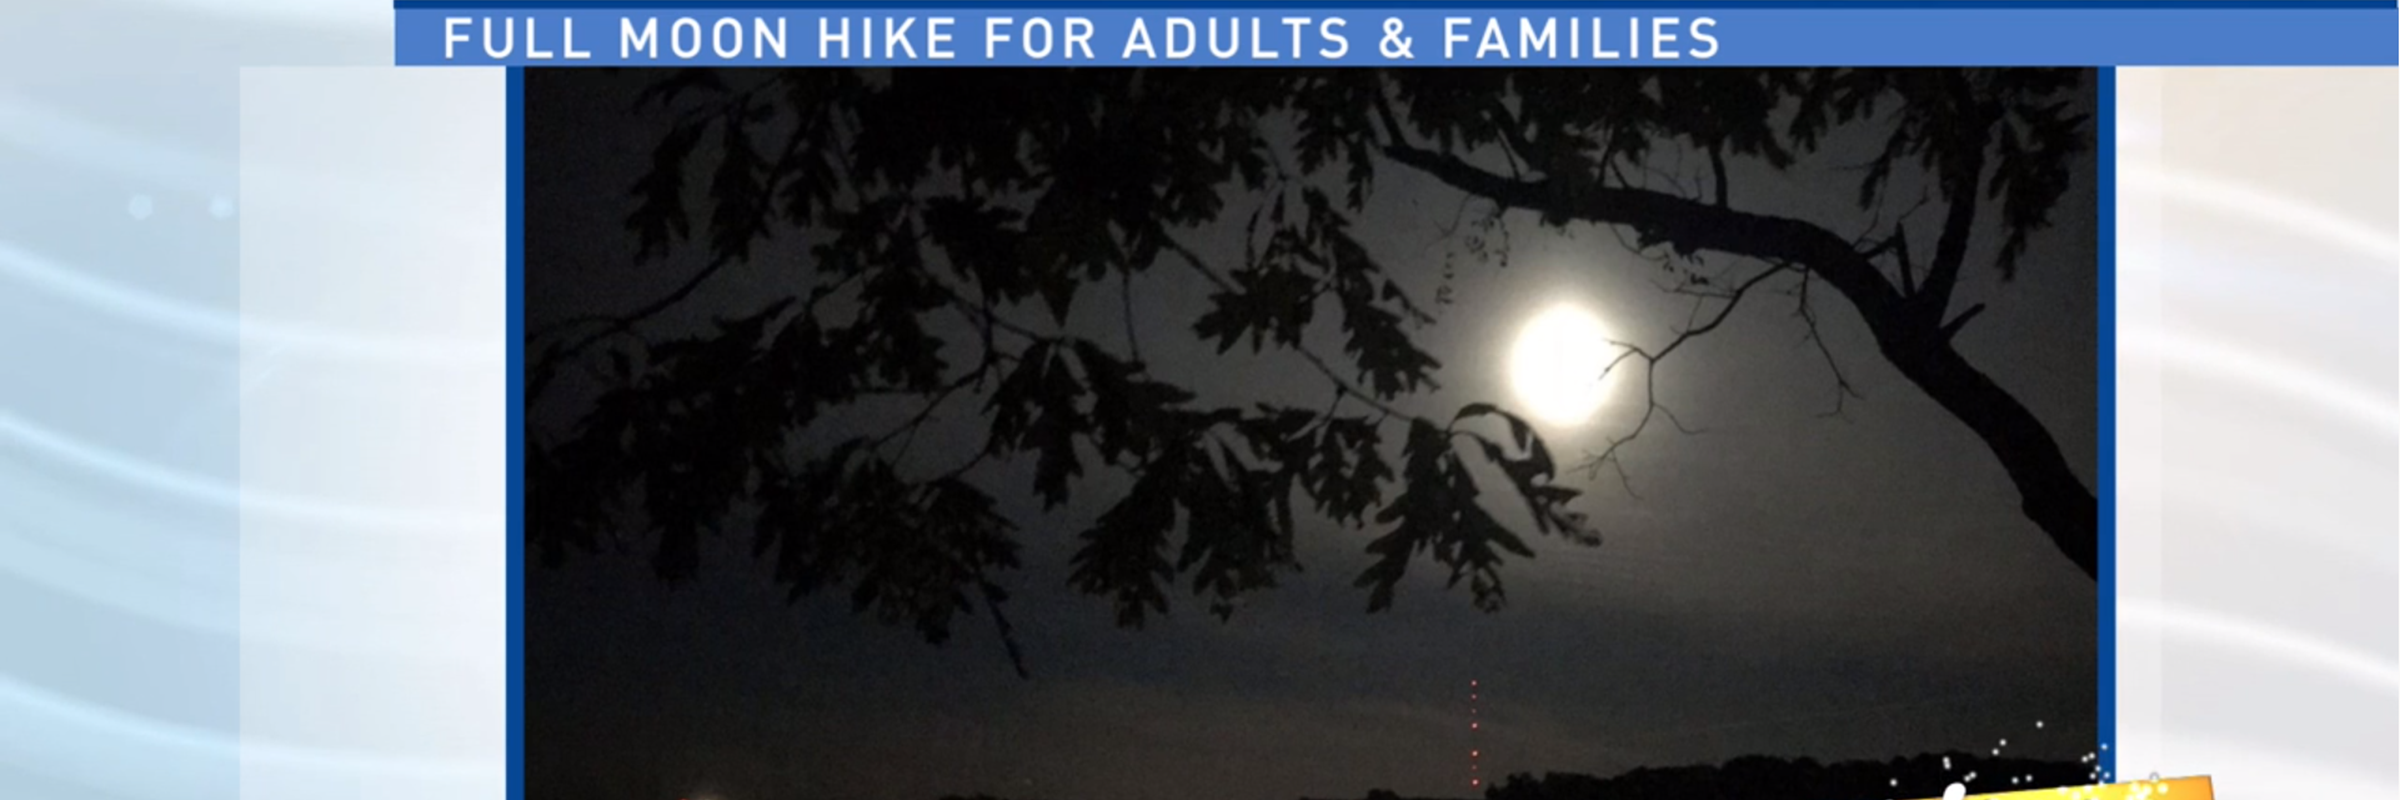 Moon Hikes, Yoga in the Woods, and an Owl Prowl